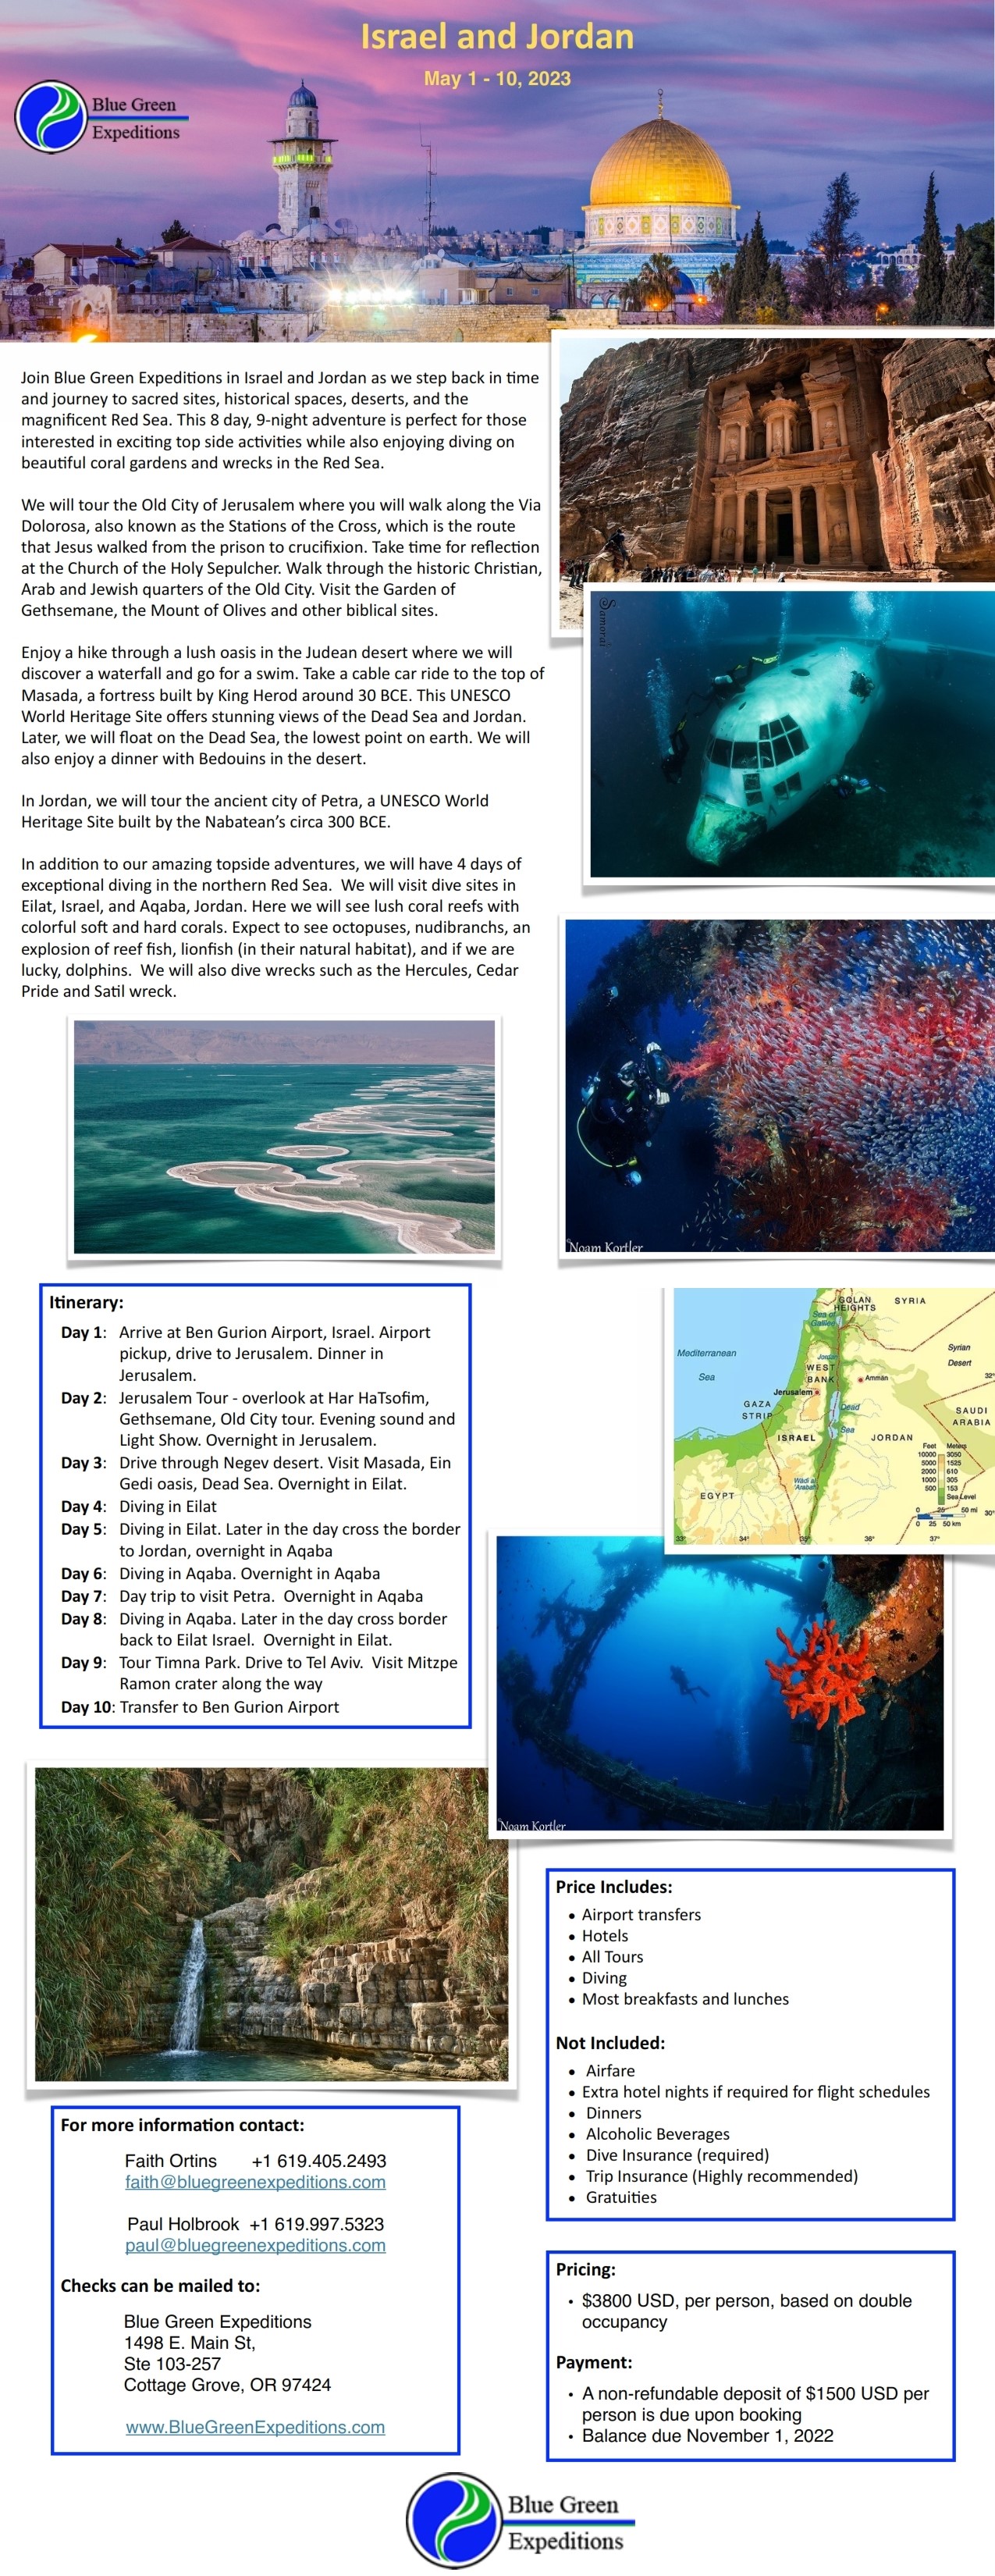 Israel and Jordan, May 1 - 10, 2023, expedition description and pricing. PDF flyer contains the same information.